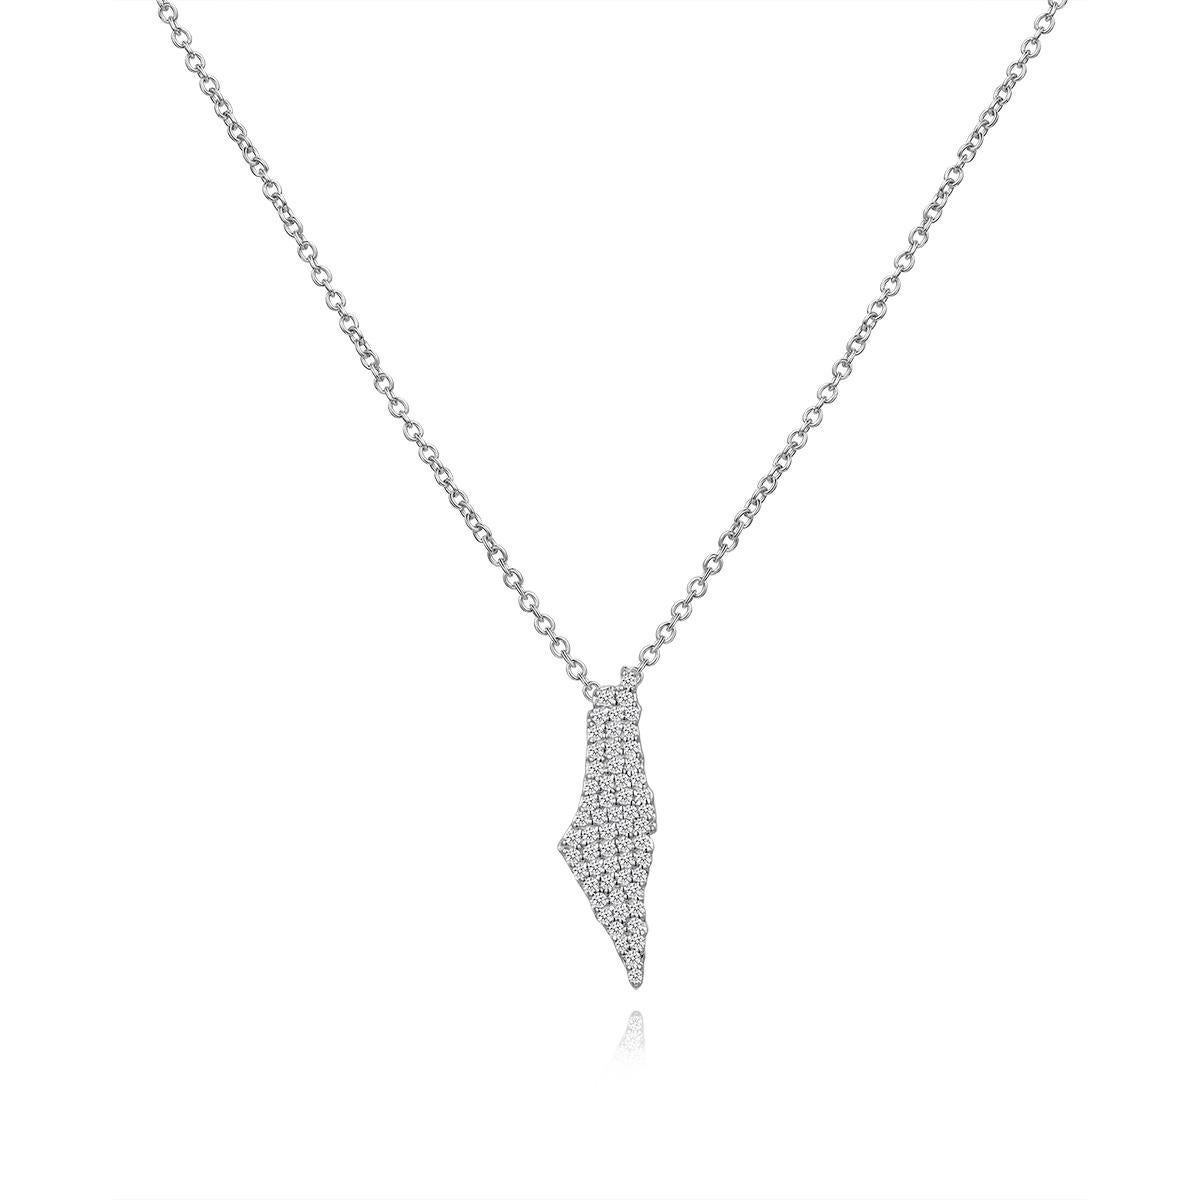 Necklace Information
Diamond Type : Natural Diamond
Metal : 14k
Metal Color : White Gold
Diamond Carat Weight : 0.45ttcw
Diamond Color-Clarity : G-SI
Diameter : 6.5x19.5mm
 
JEWELRY CARE
Over the course of time, body oil and skin products can